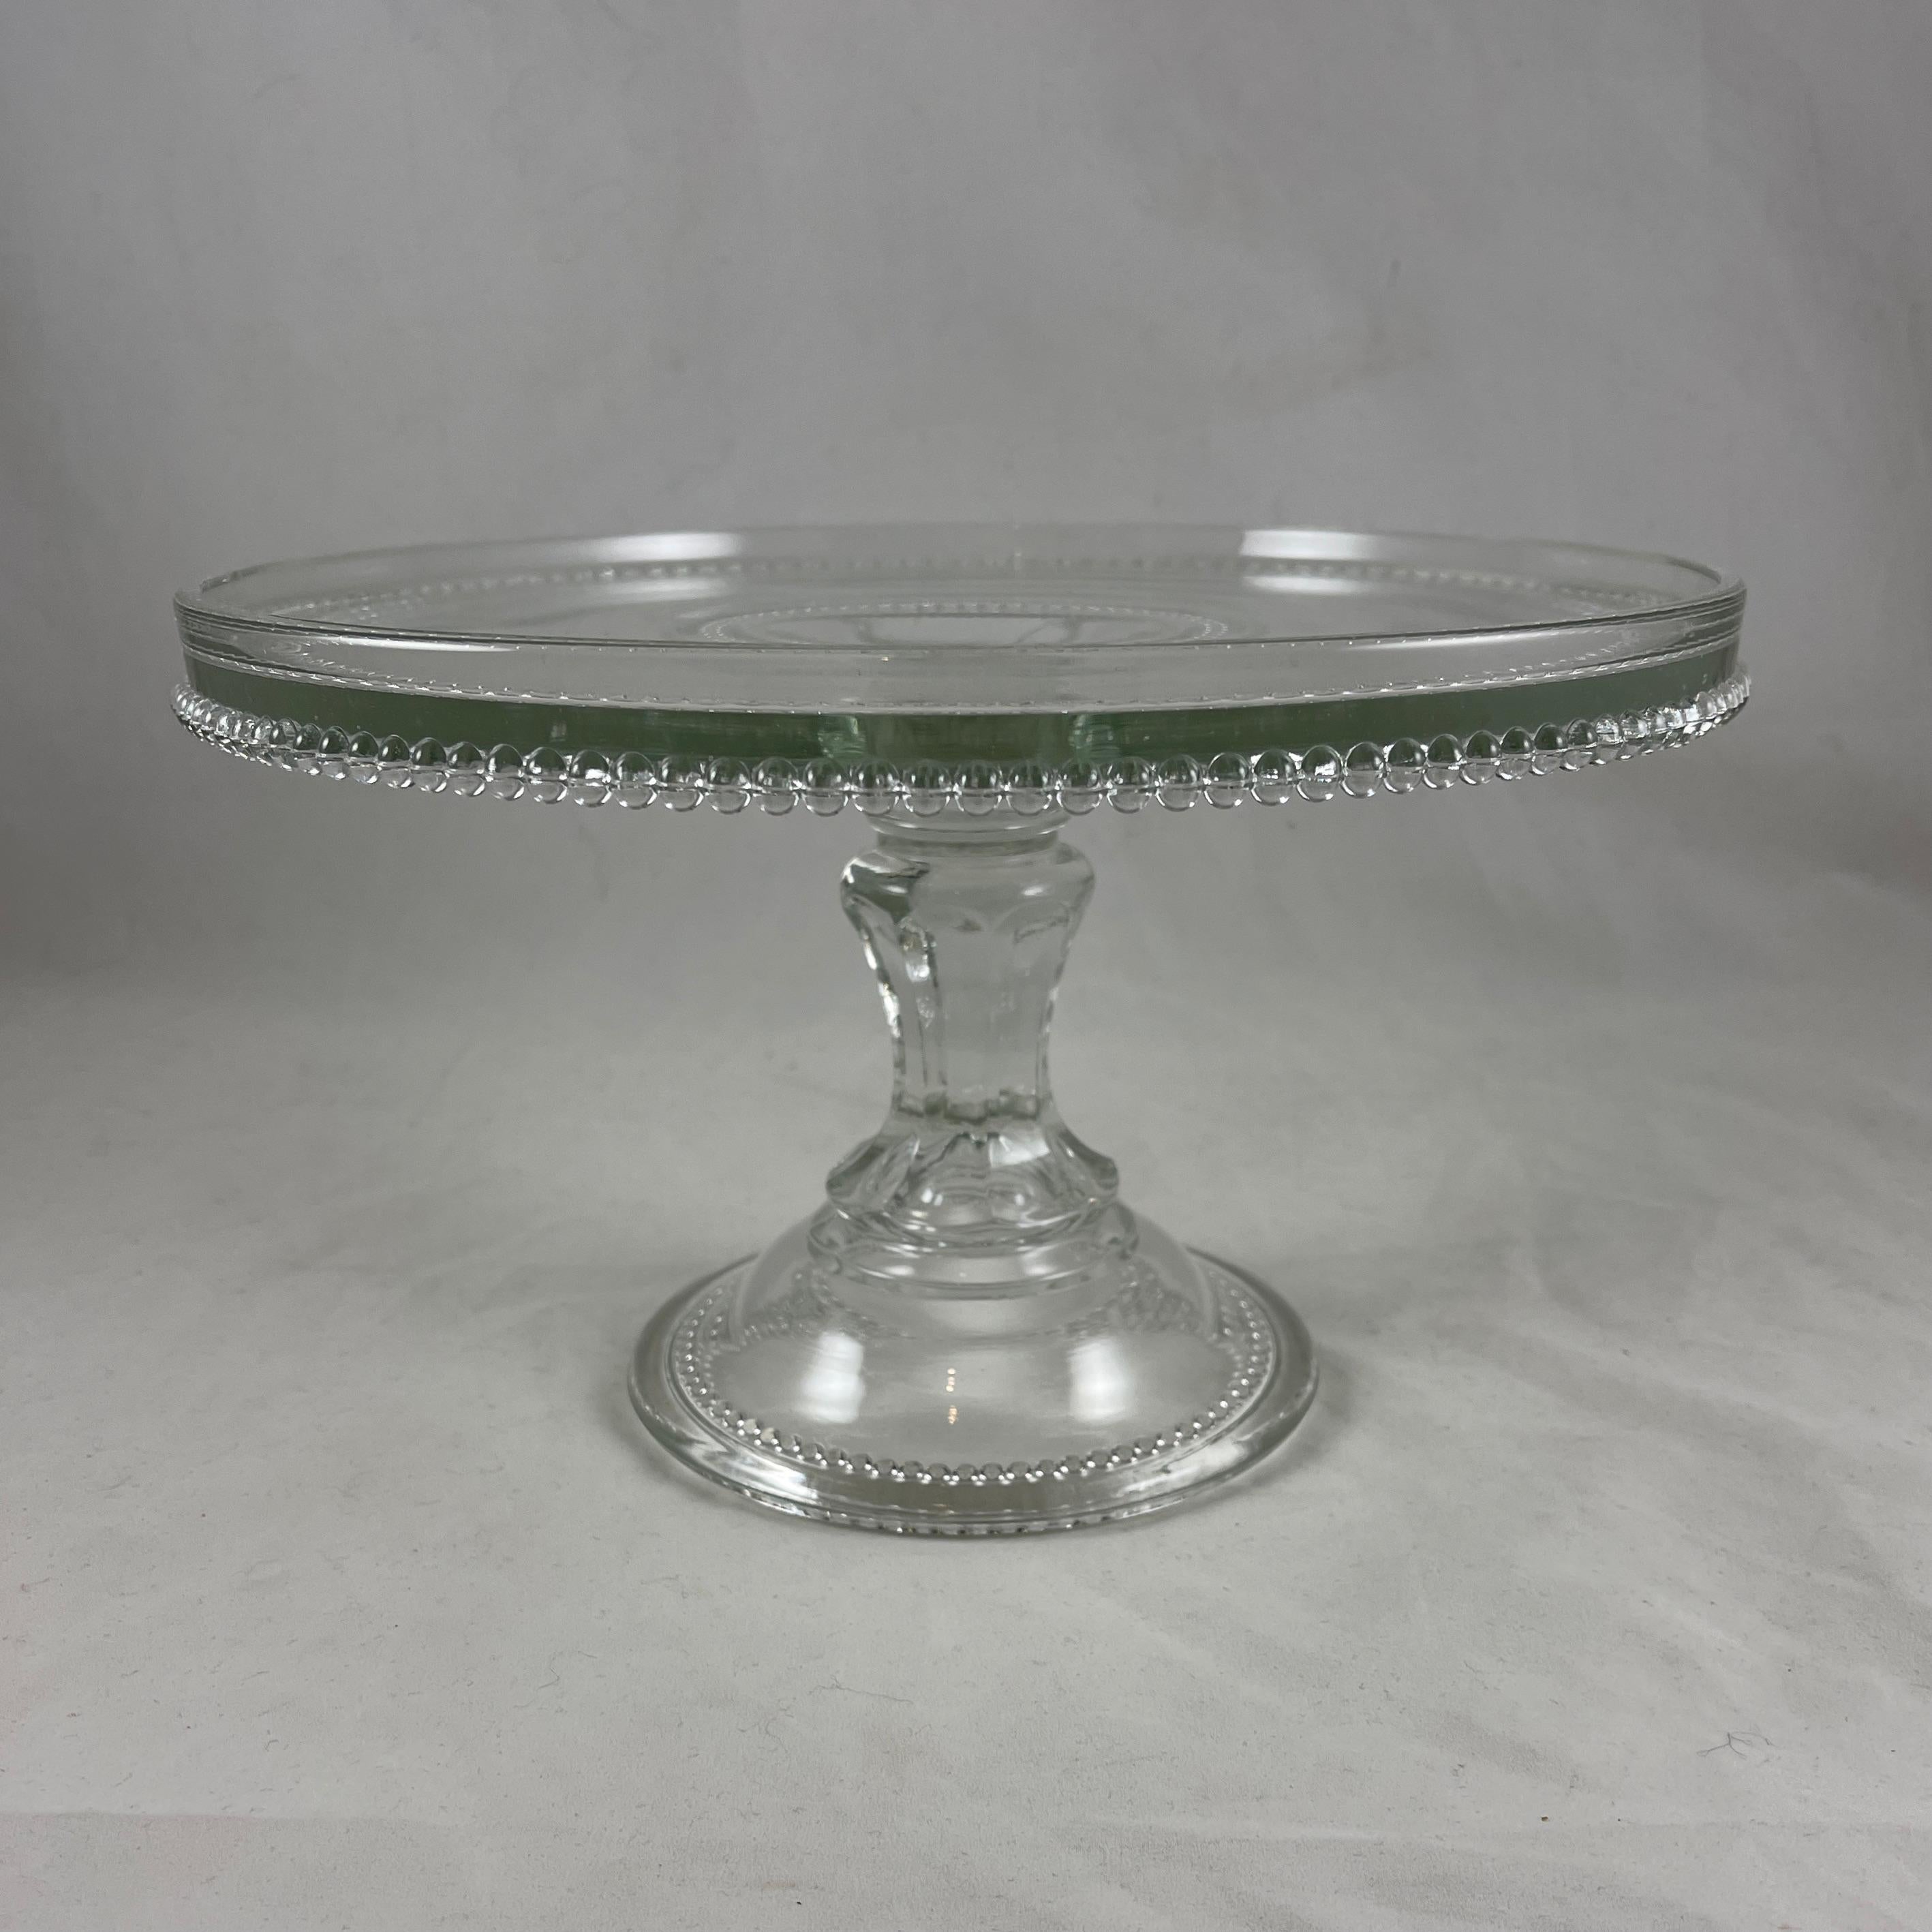 Vintage Candlewick Beaded Cake Stand 11 across x 6 tall